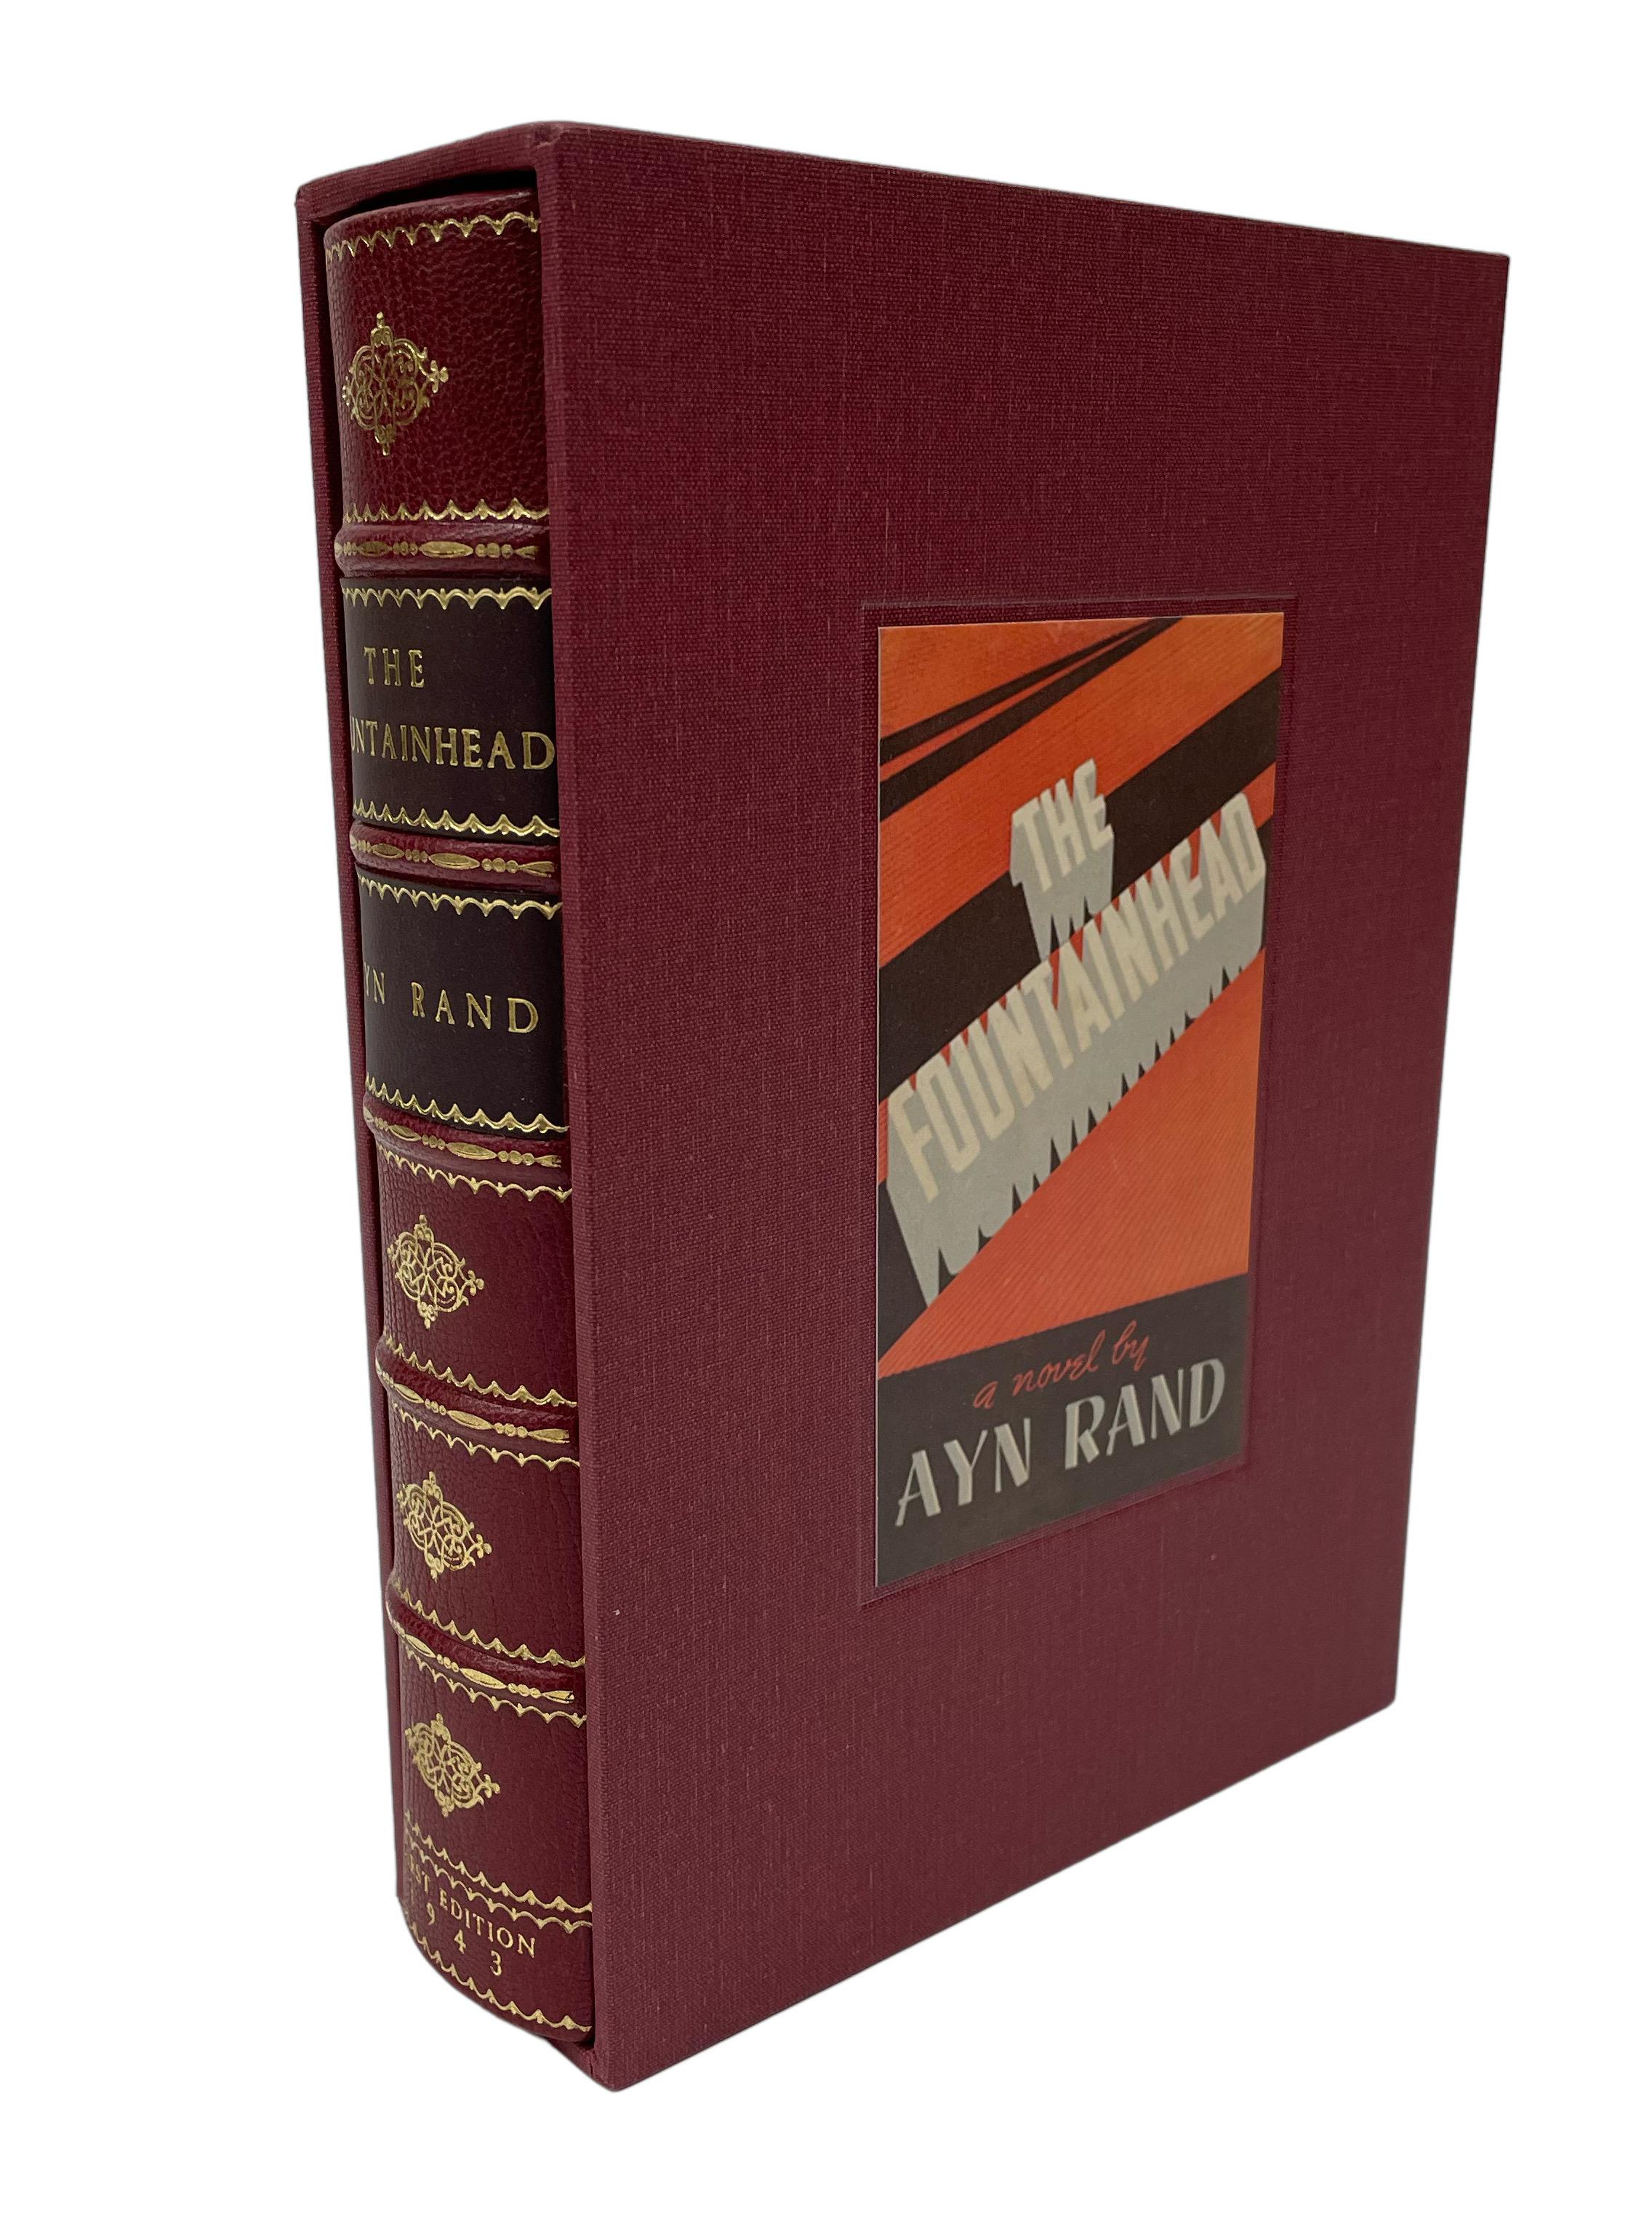 Rand, Ayn. The Fountainhead. Indianapolis: Bobbs-Merrill, 1943. First edition, first state. Octavo. Rebound in full Moroccan leather with Rand’s gilt stamped facsimile signature on the front board, gilt titles and stamps to the spine, and a new